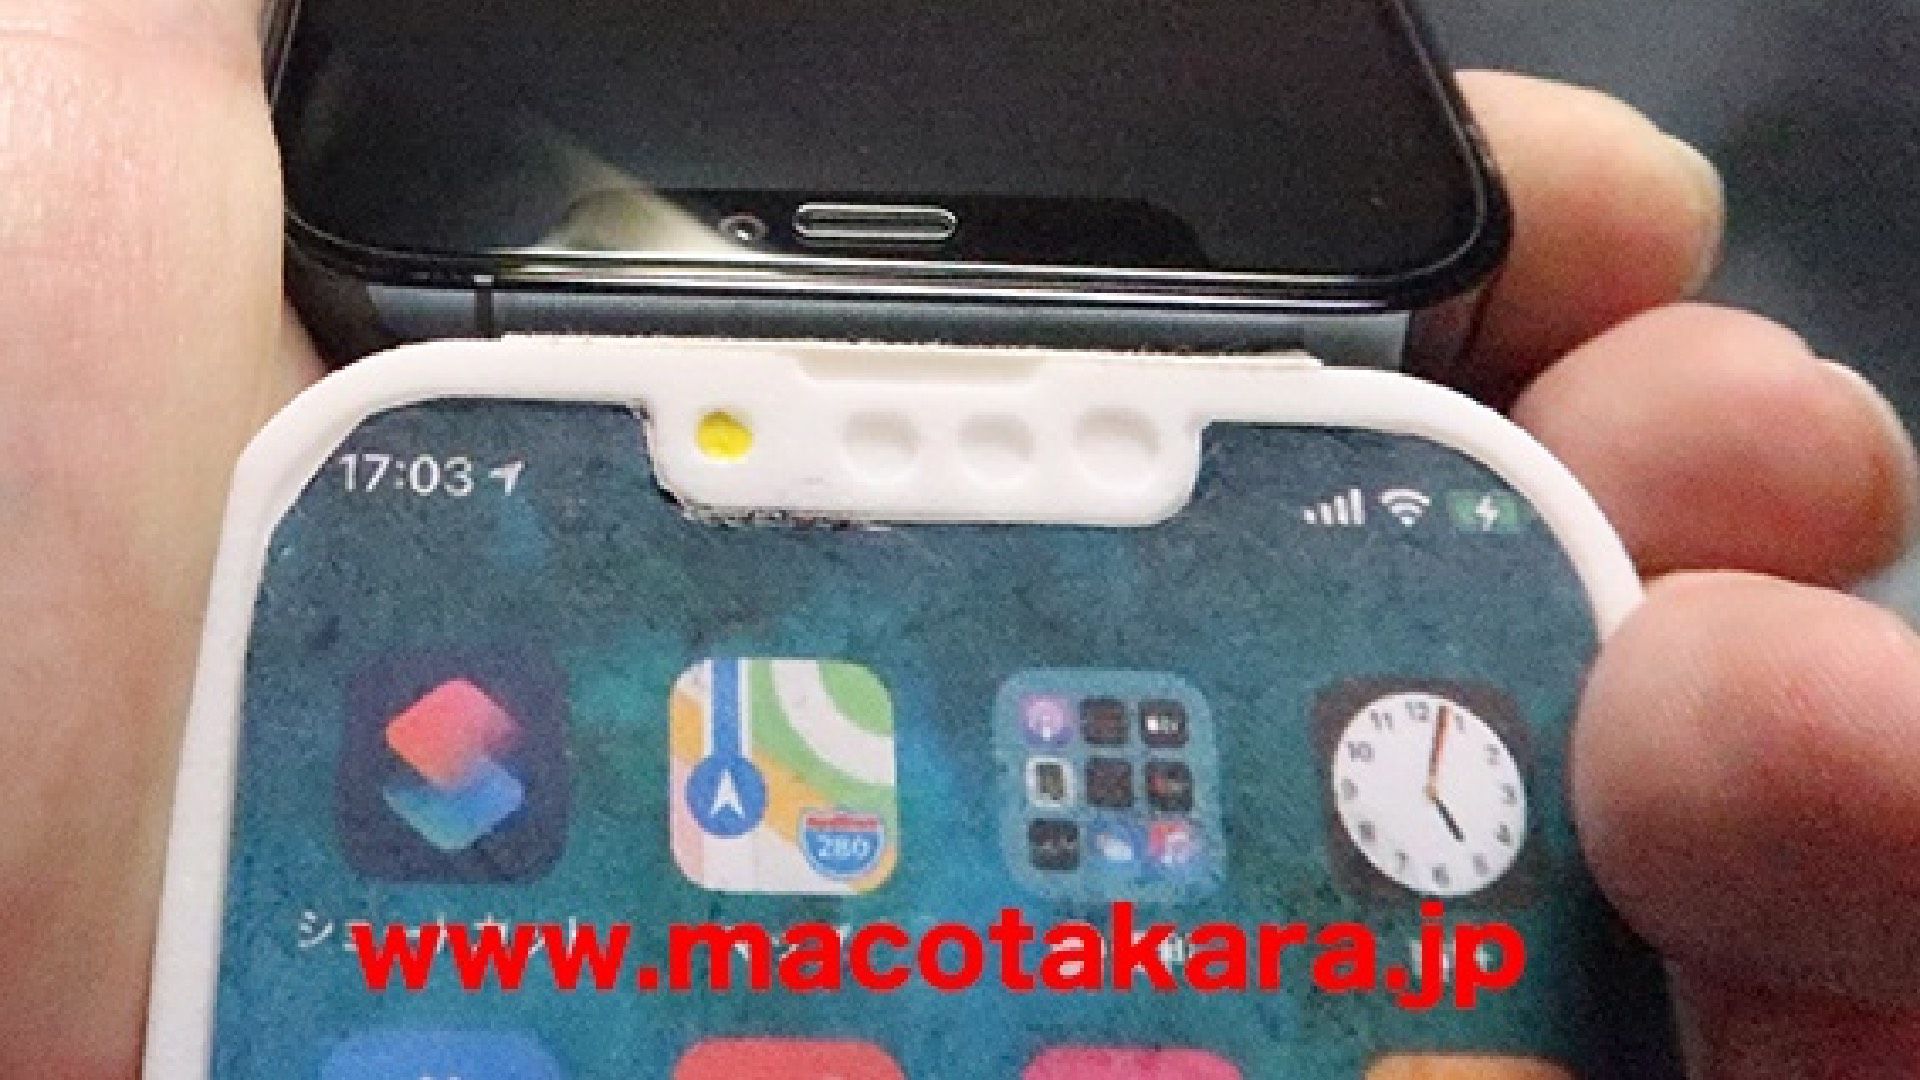 The alleged mockup of the iPhone 13 Pro shows smaller notch, repositioned headset and front camera